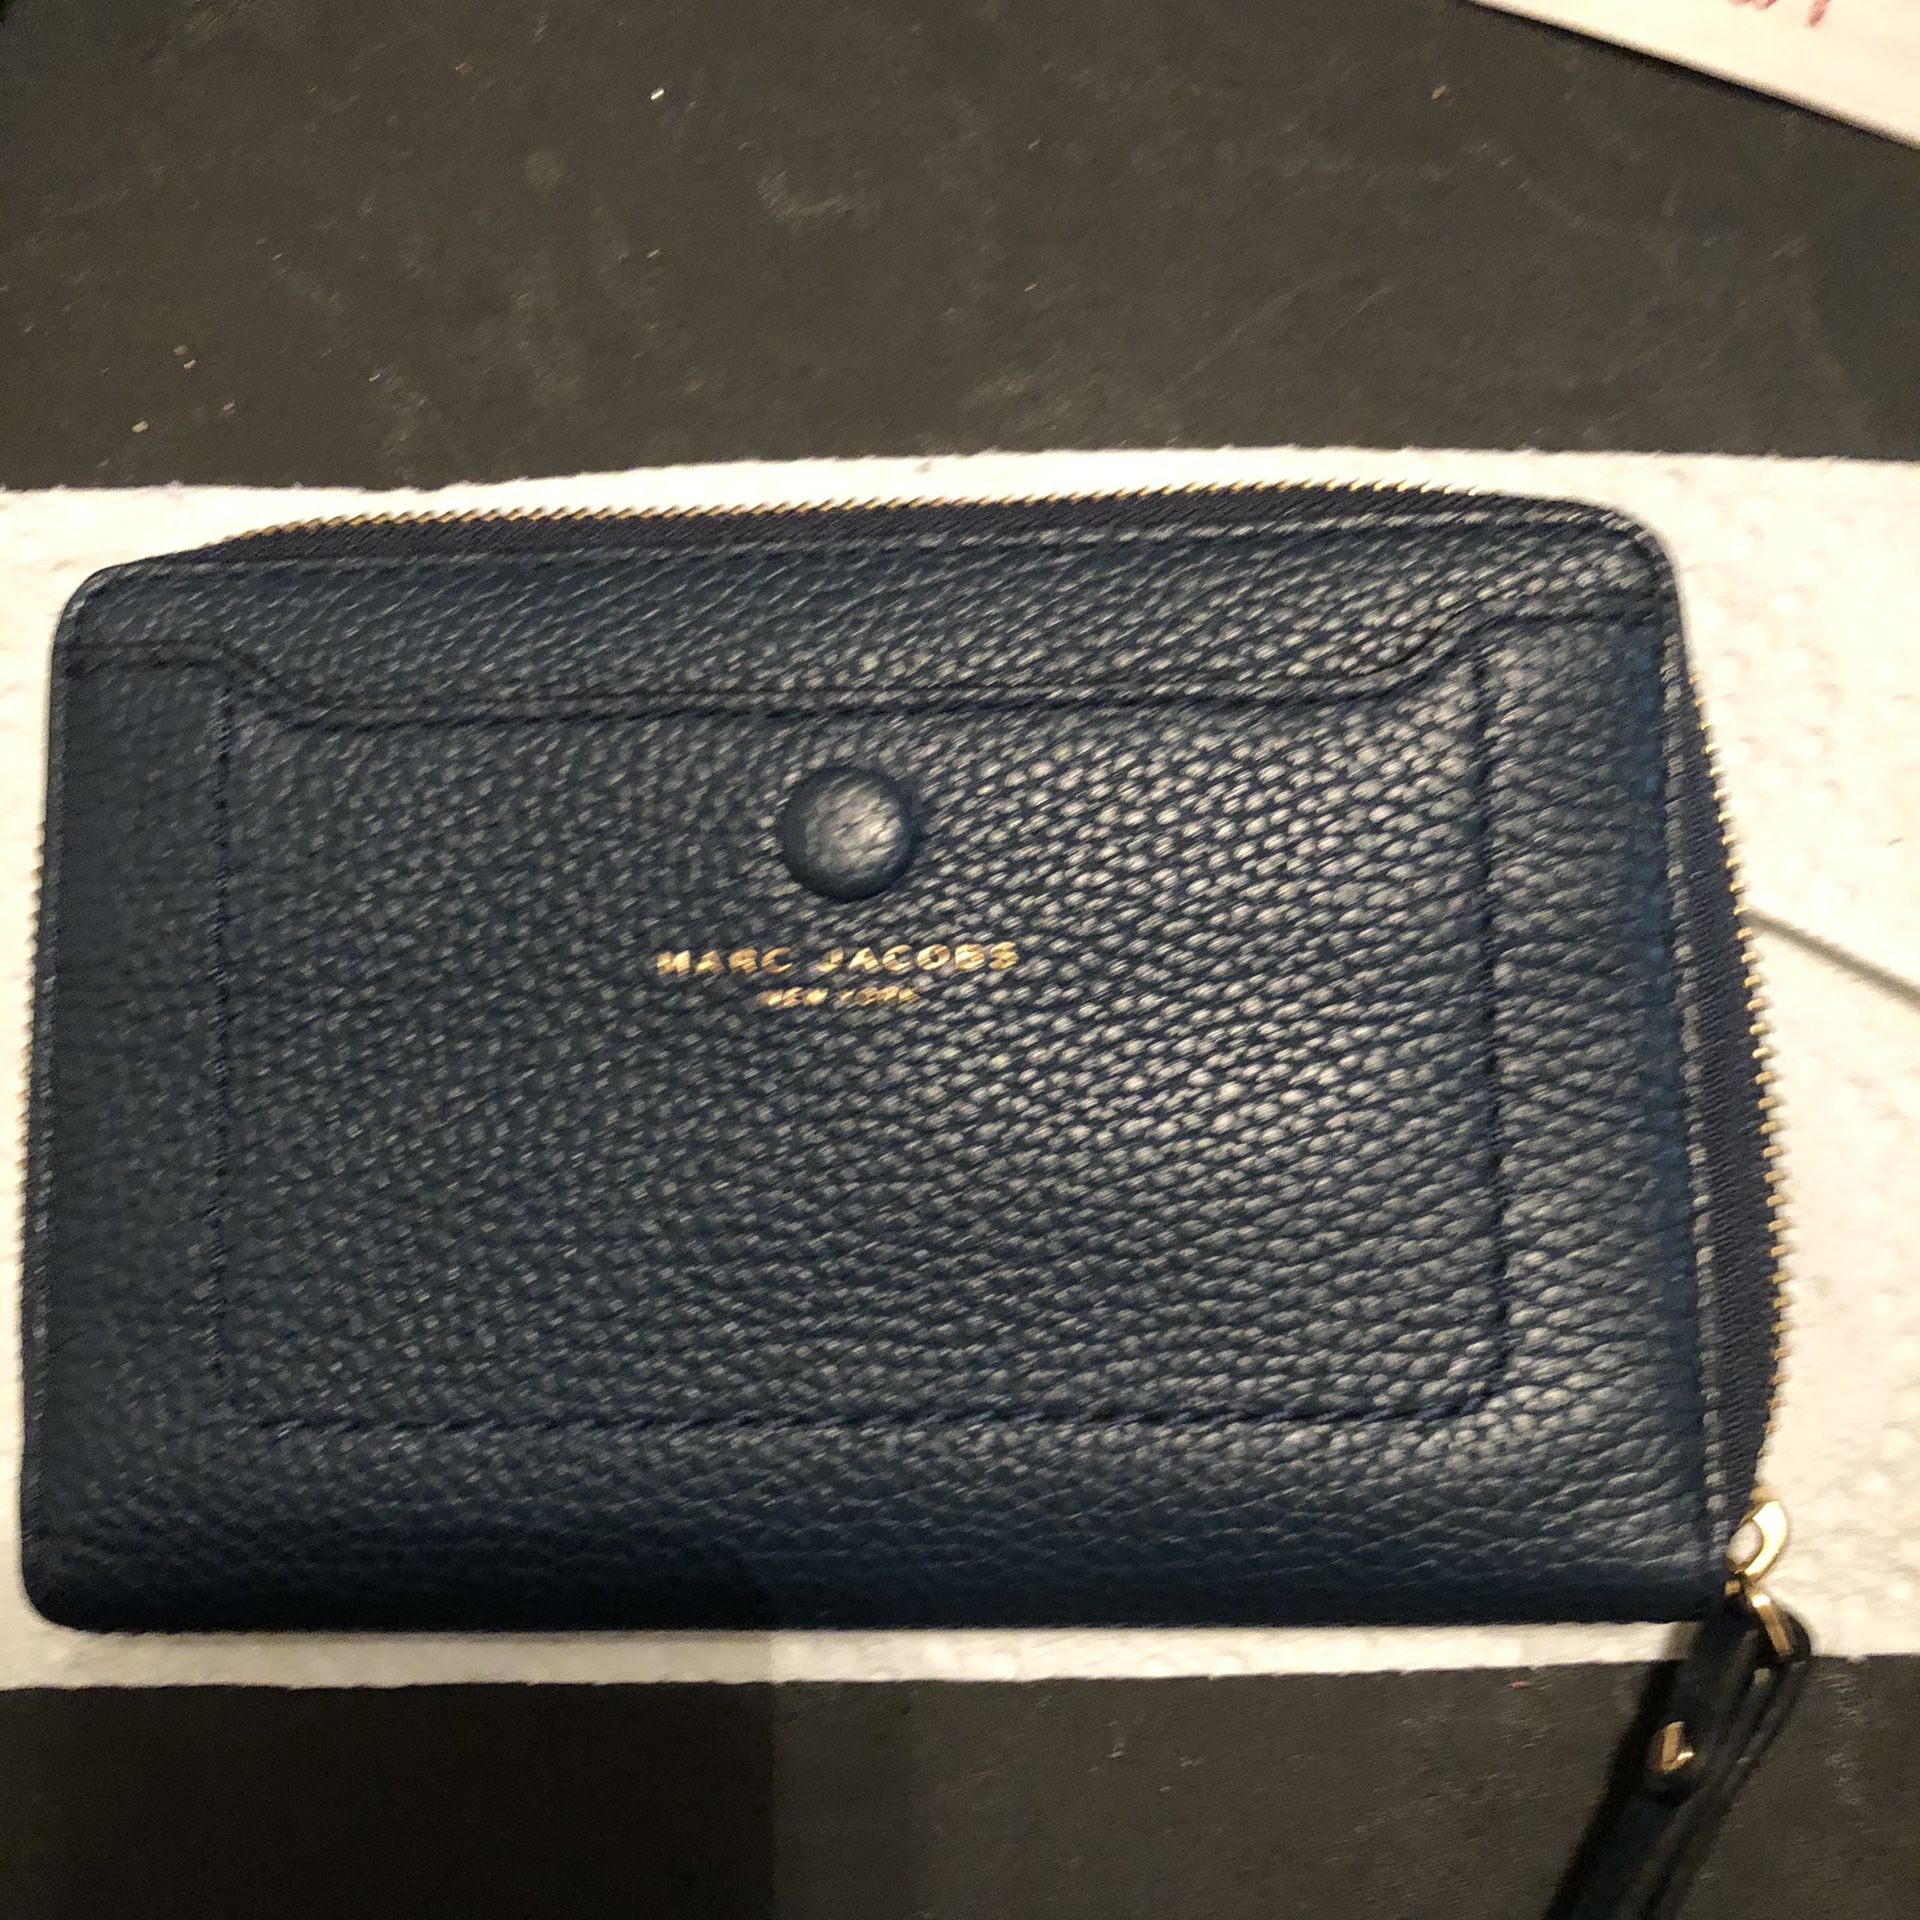 New Authentic Marc Jacobs Wristlet Wallet. PRICE IS FIRM